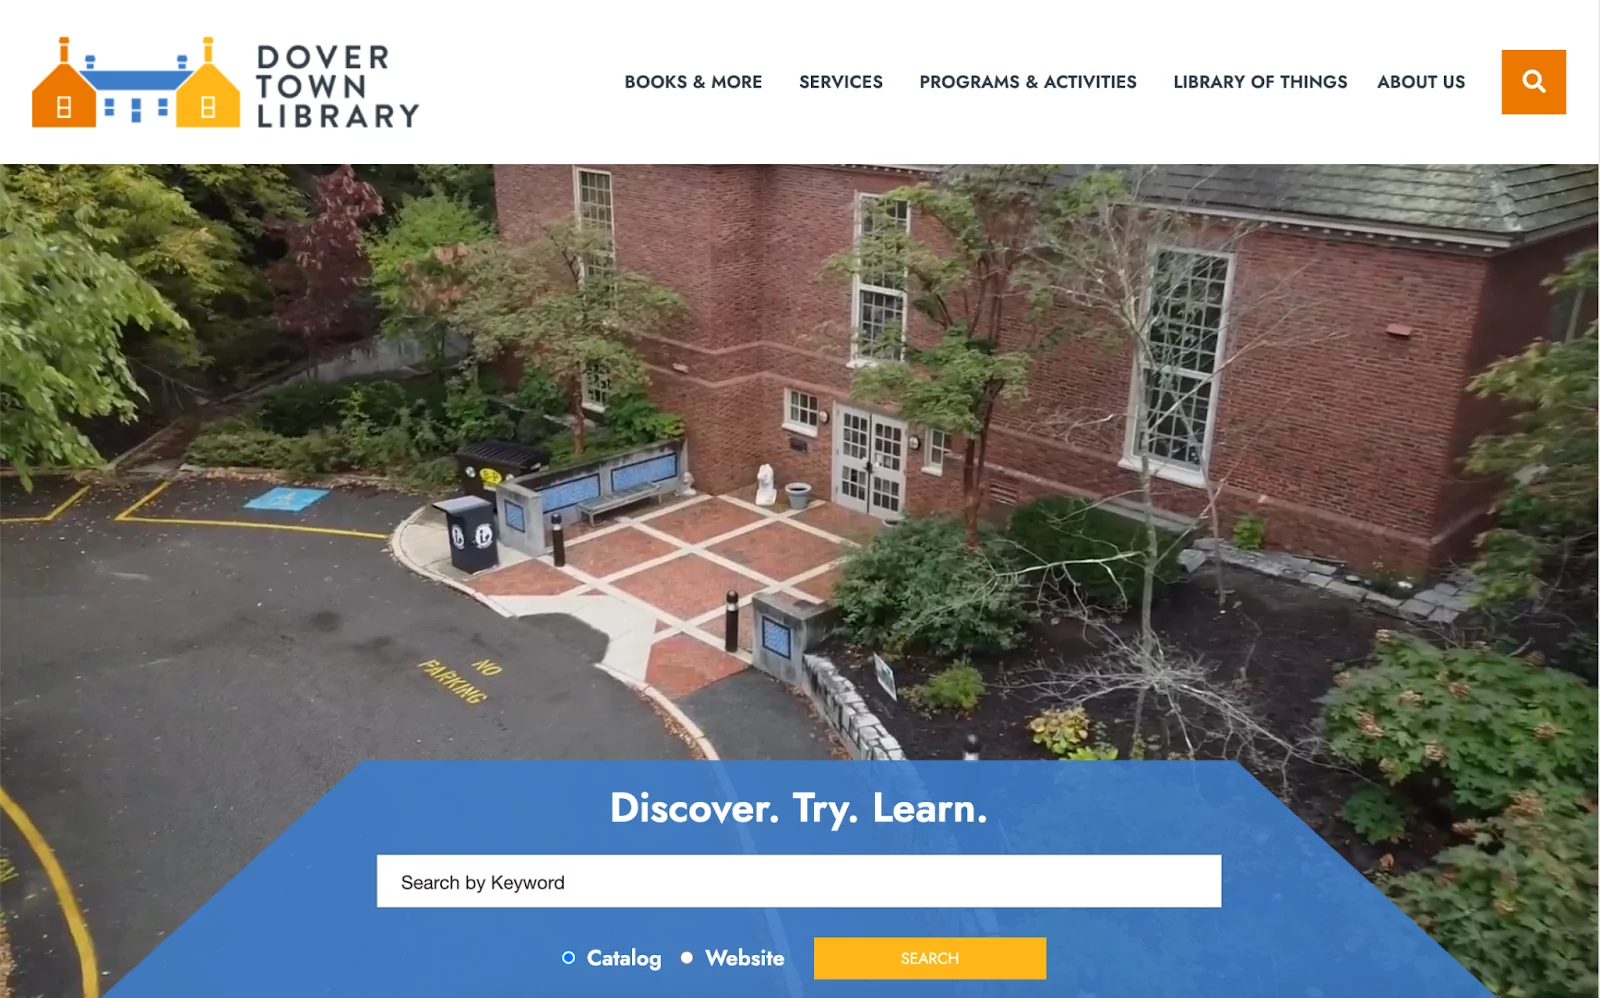 custom landing pages in our website design project for Dover Town Library